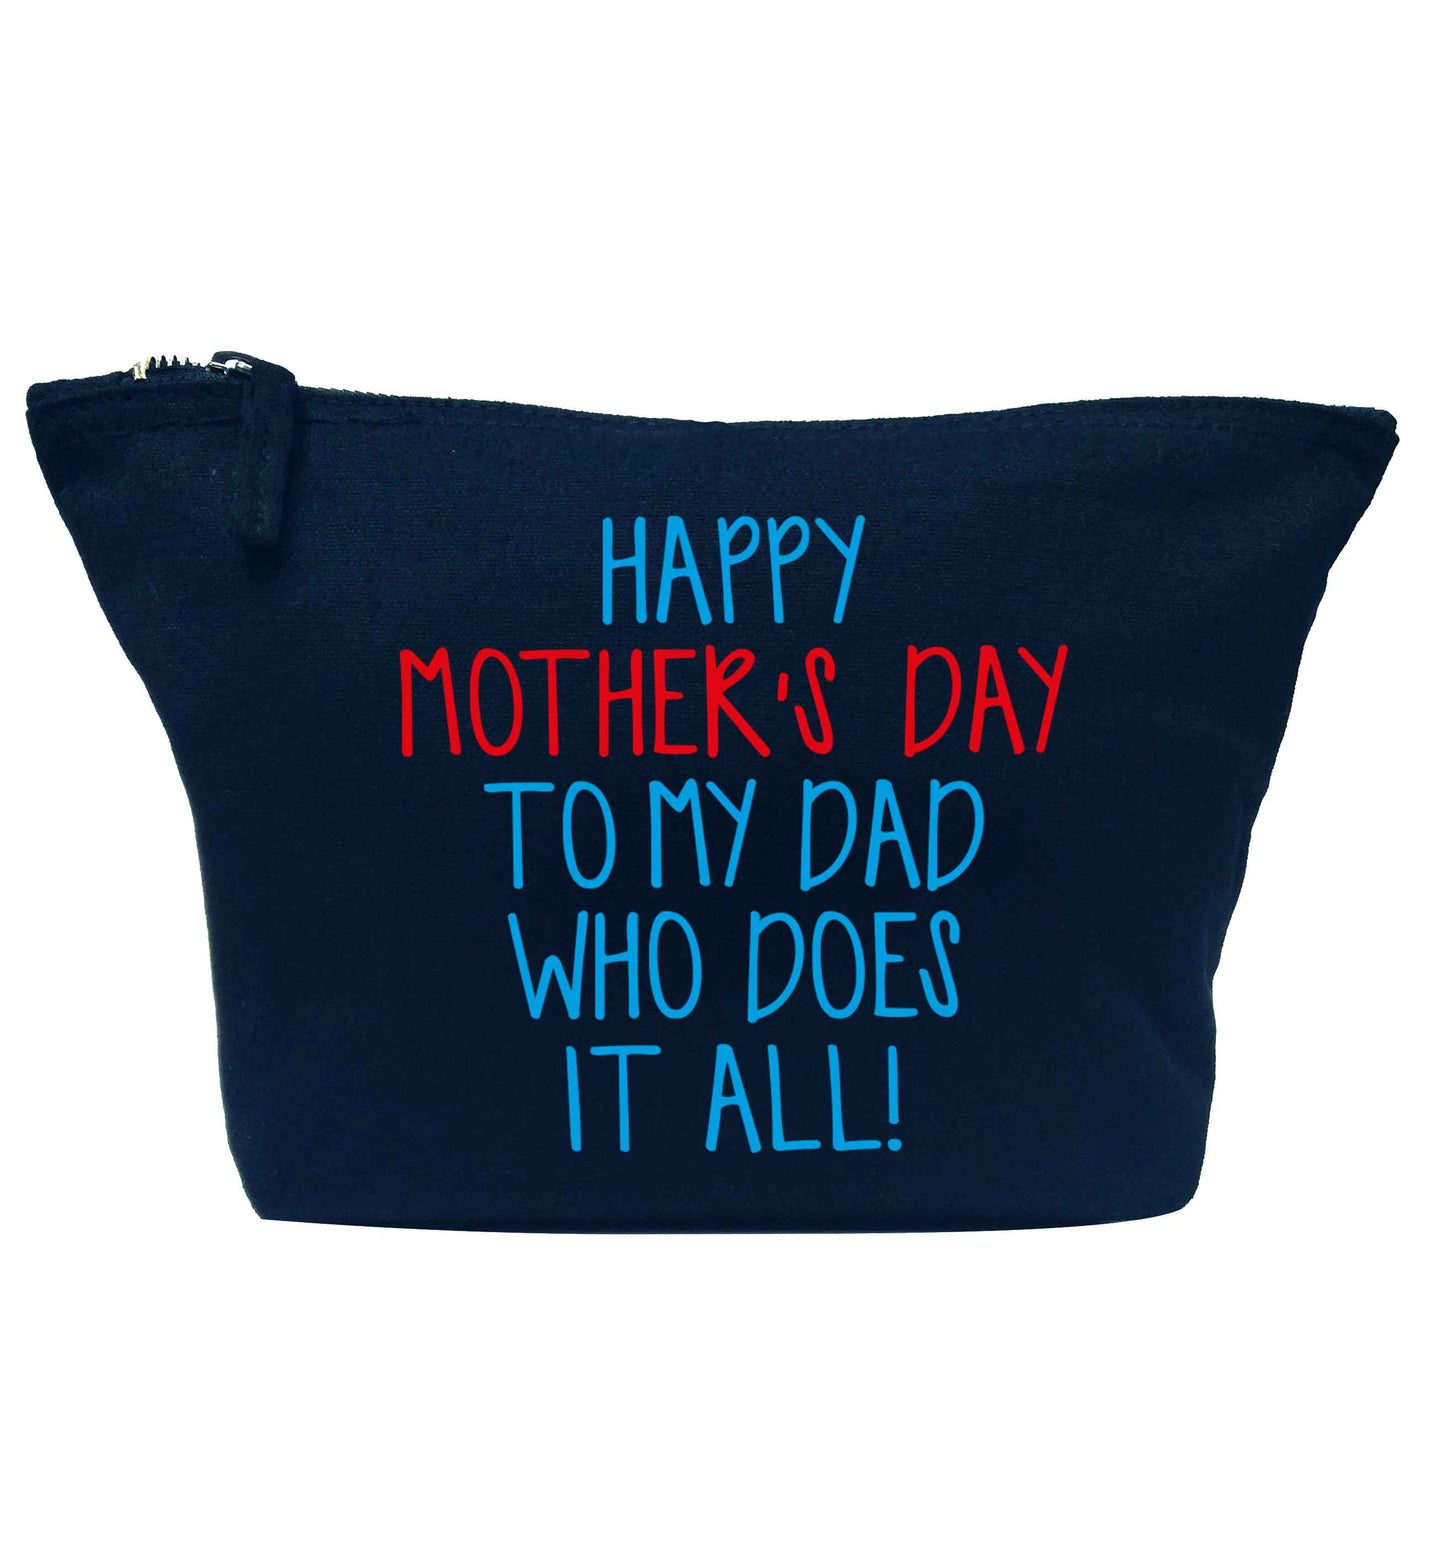 Happy mother's day to my dad who does it all! navy makeup bag